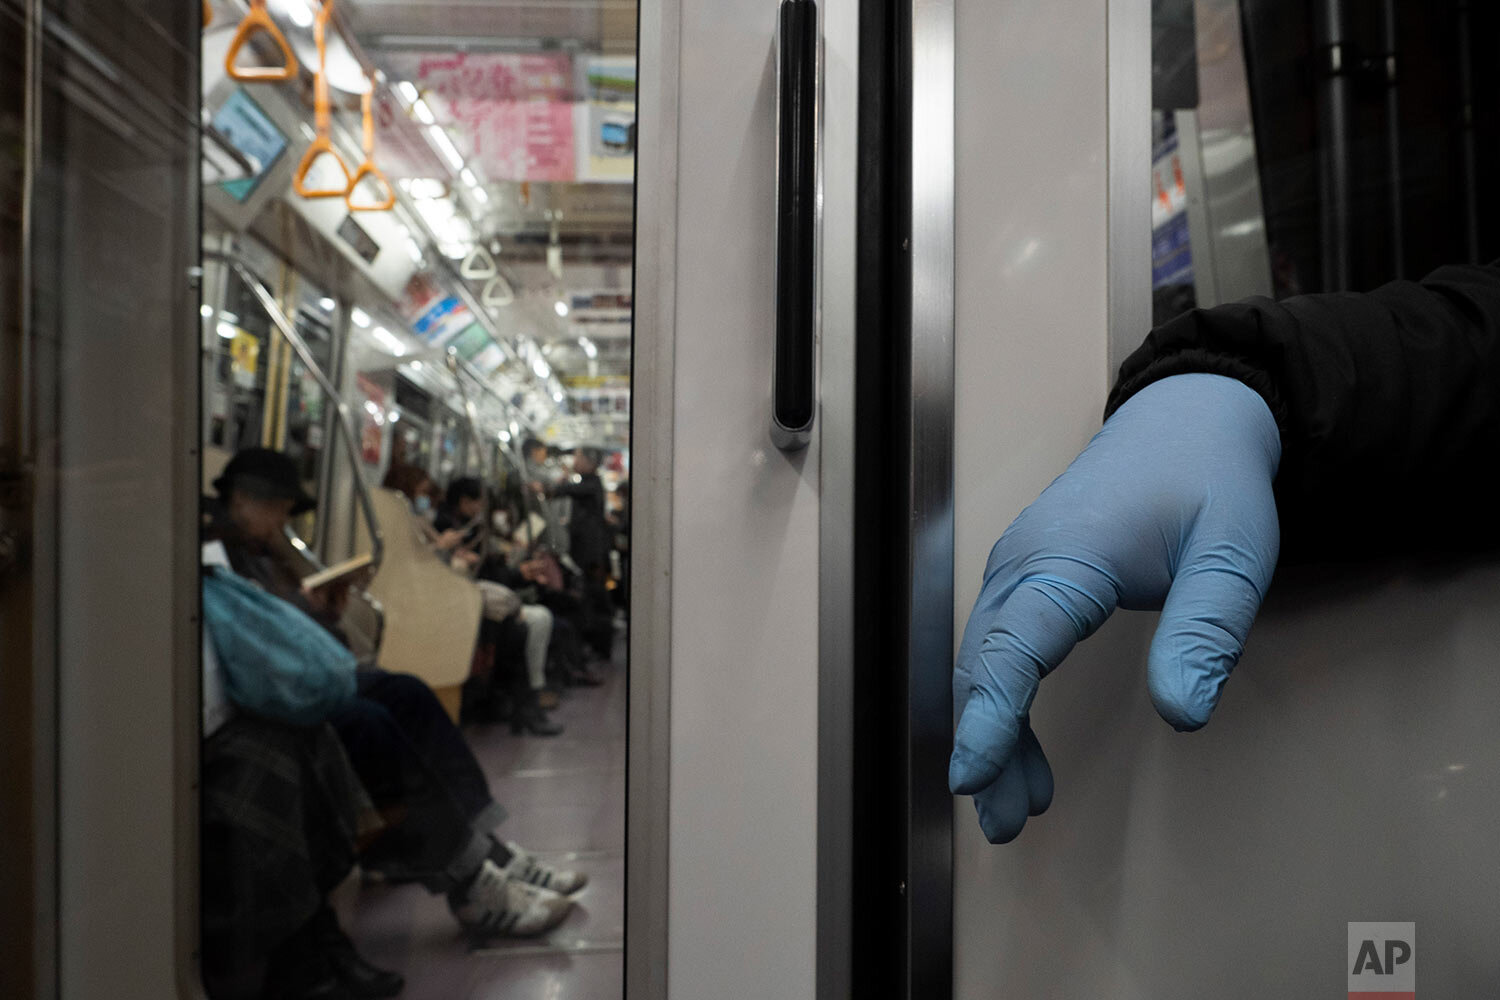  A man wearing a protective glove sits in a train in Tokyo, Monday, March 16, 2020. (AP Photo/Jae C. Hong) 